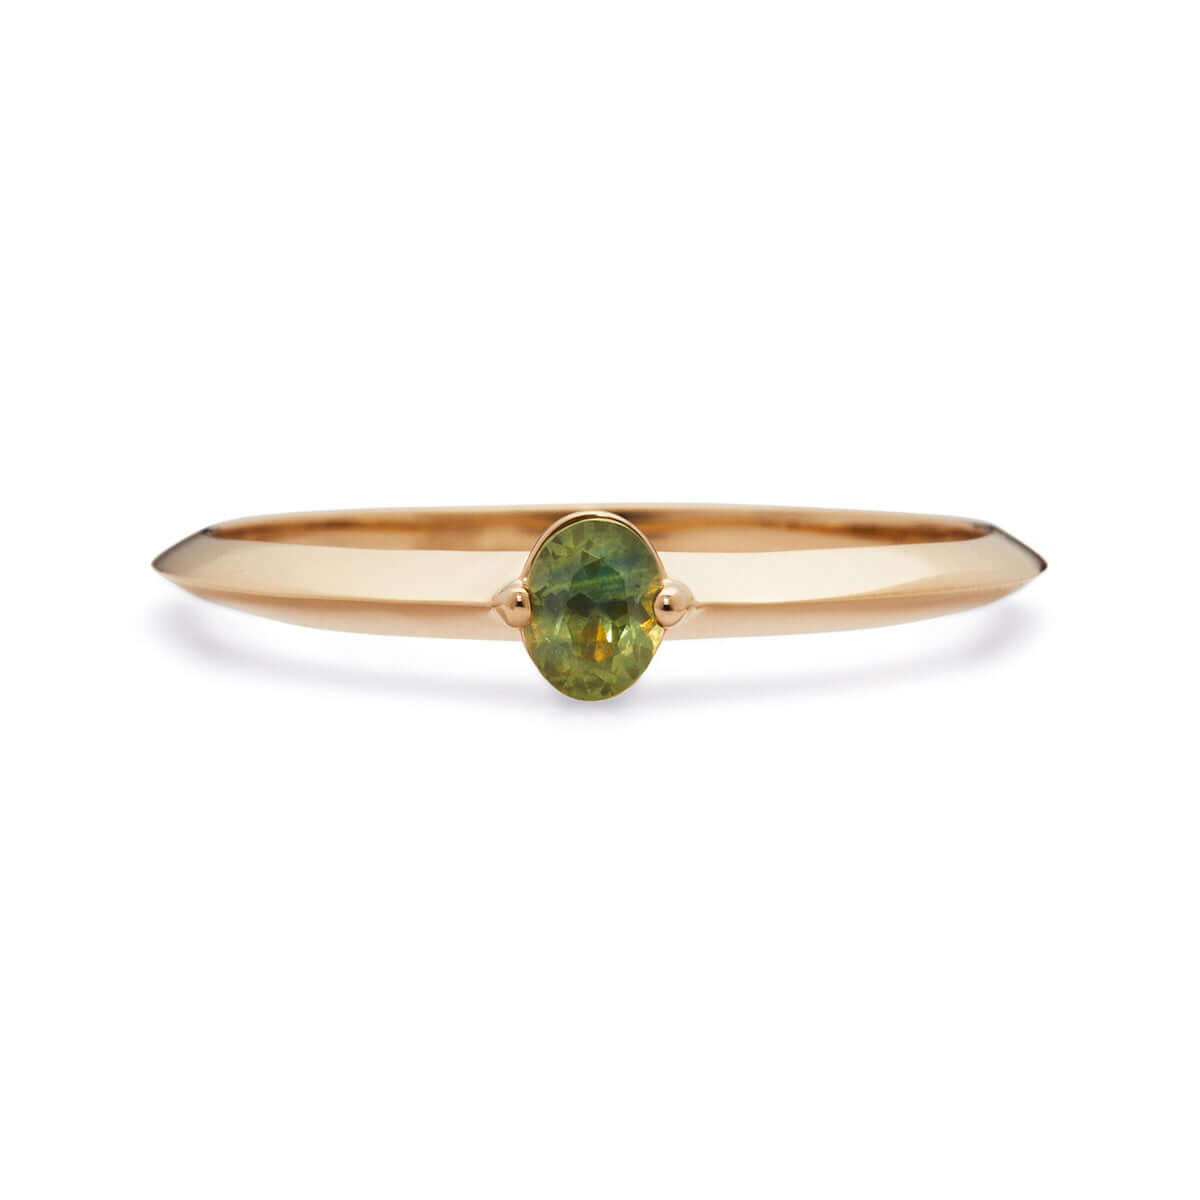 An oval Australian sapphire set in a thin gold band, revealing the stone's mix of greens.